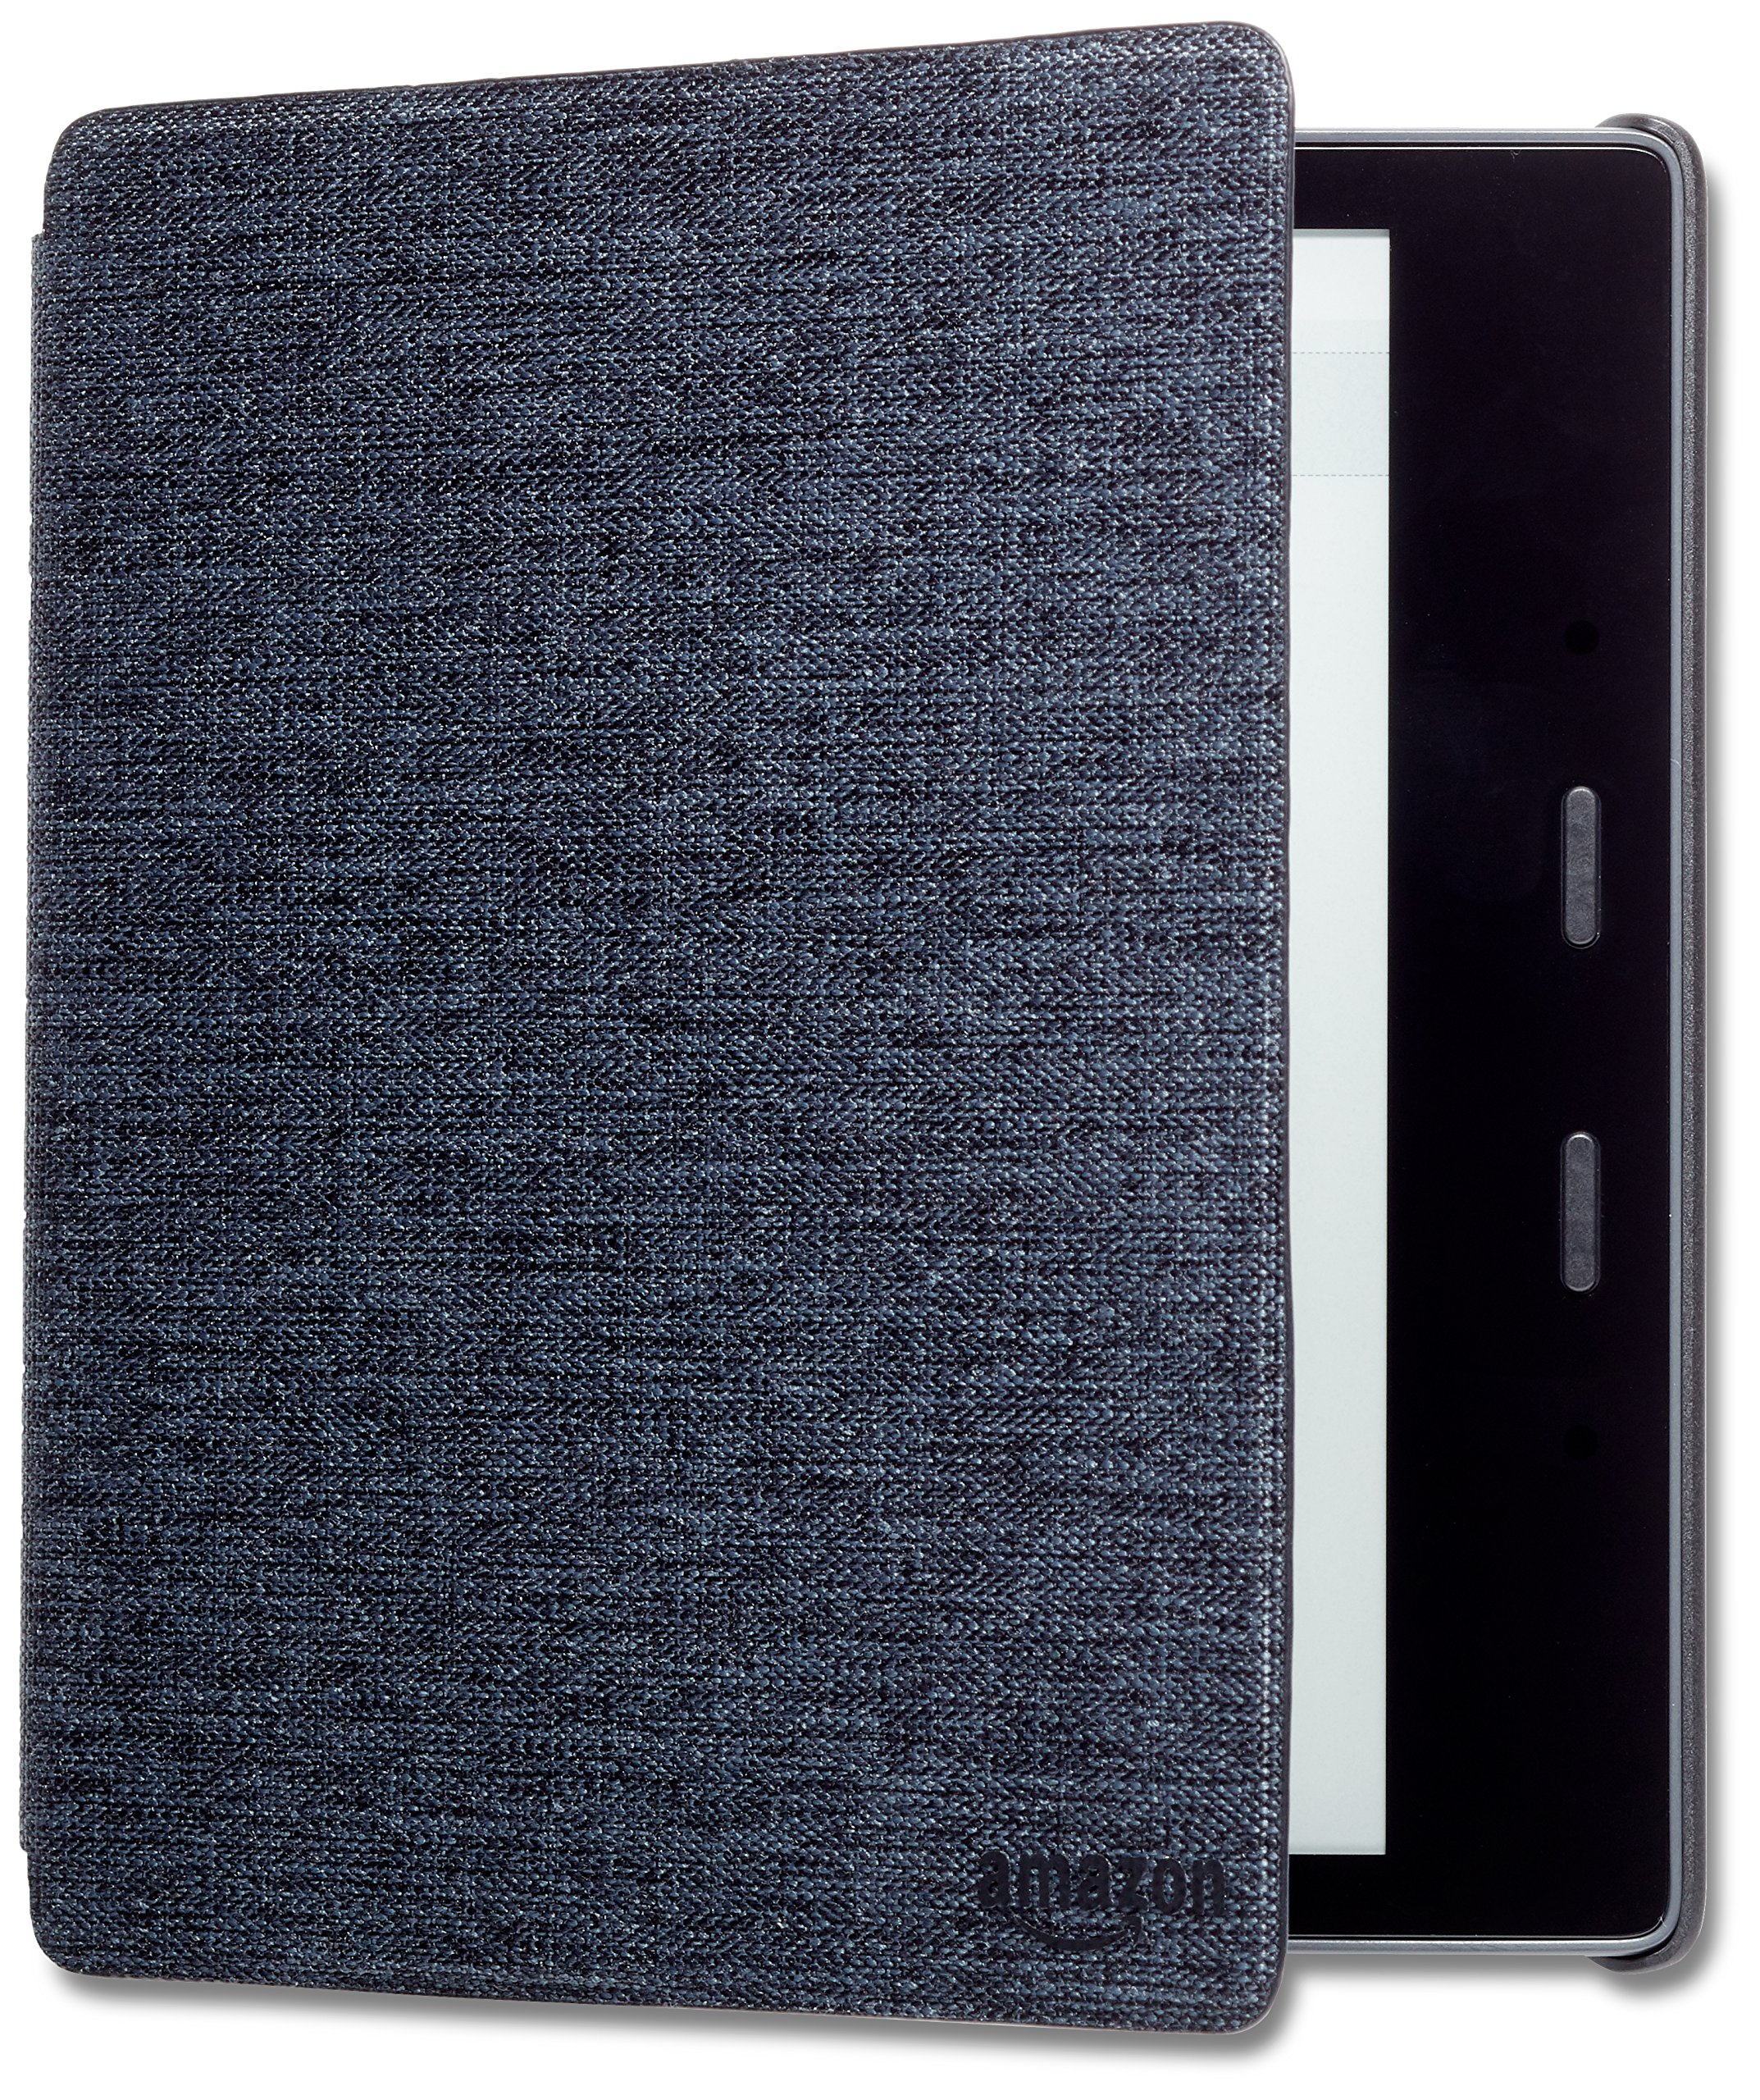 Book Cover Kindle Oasis Water-Safe Fabric Cover, Charcoal Black